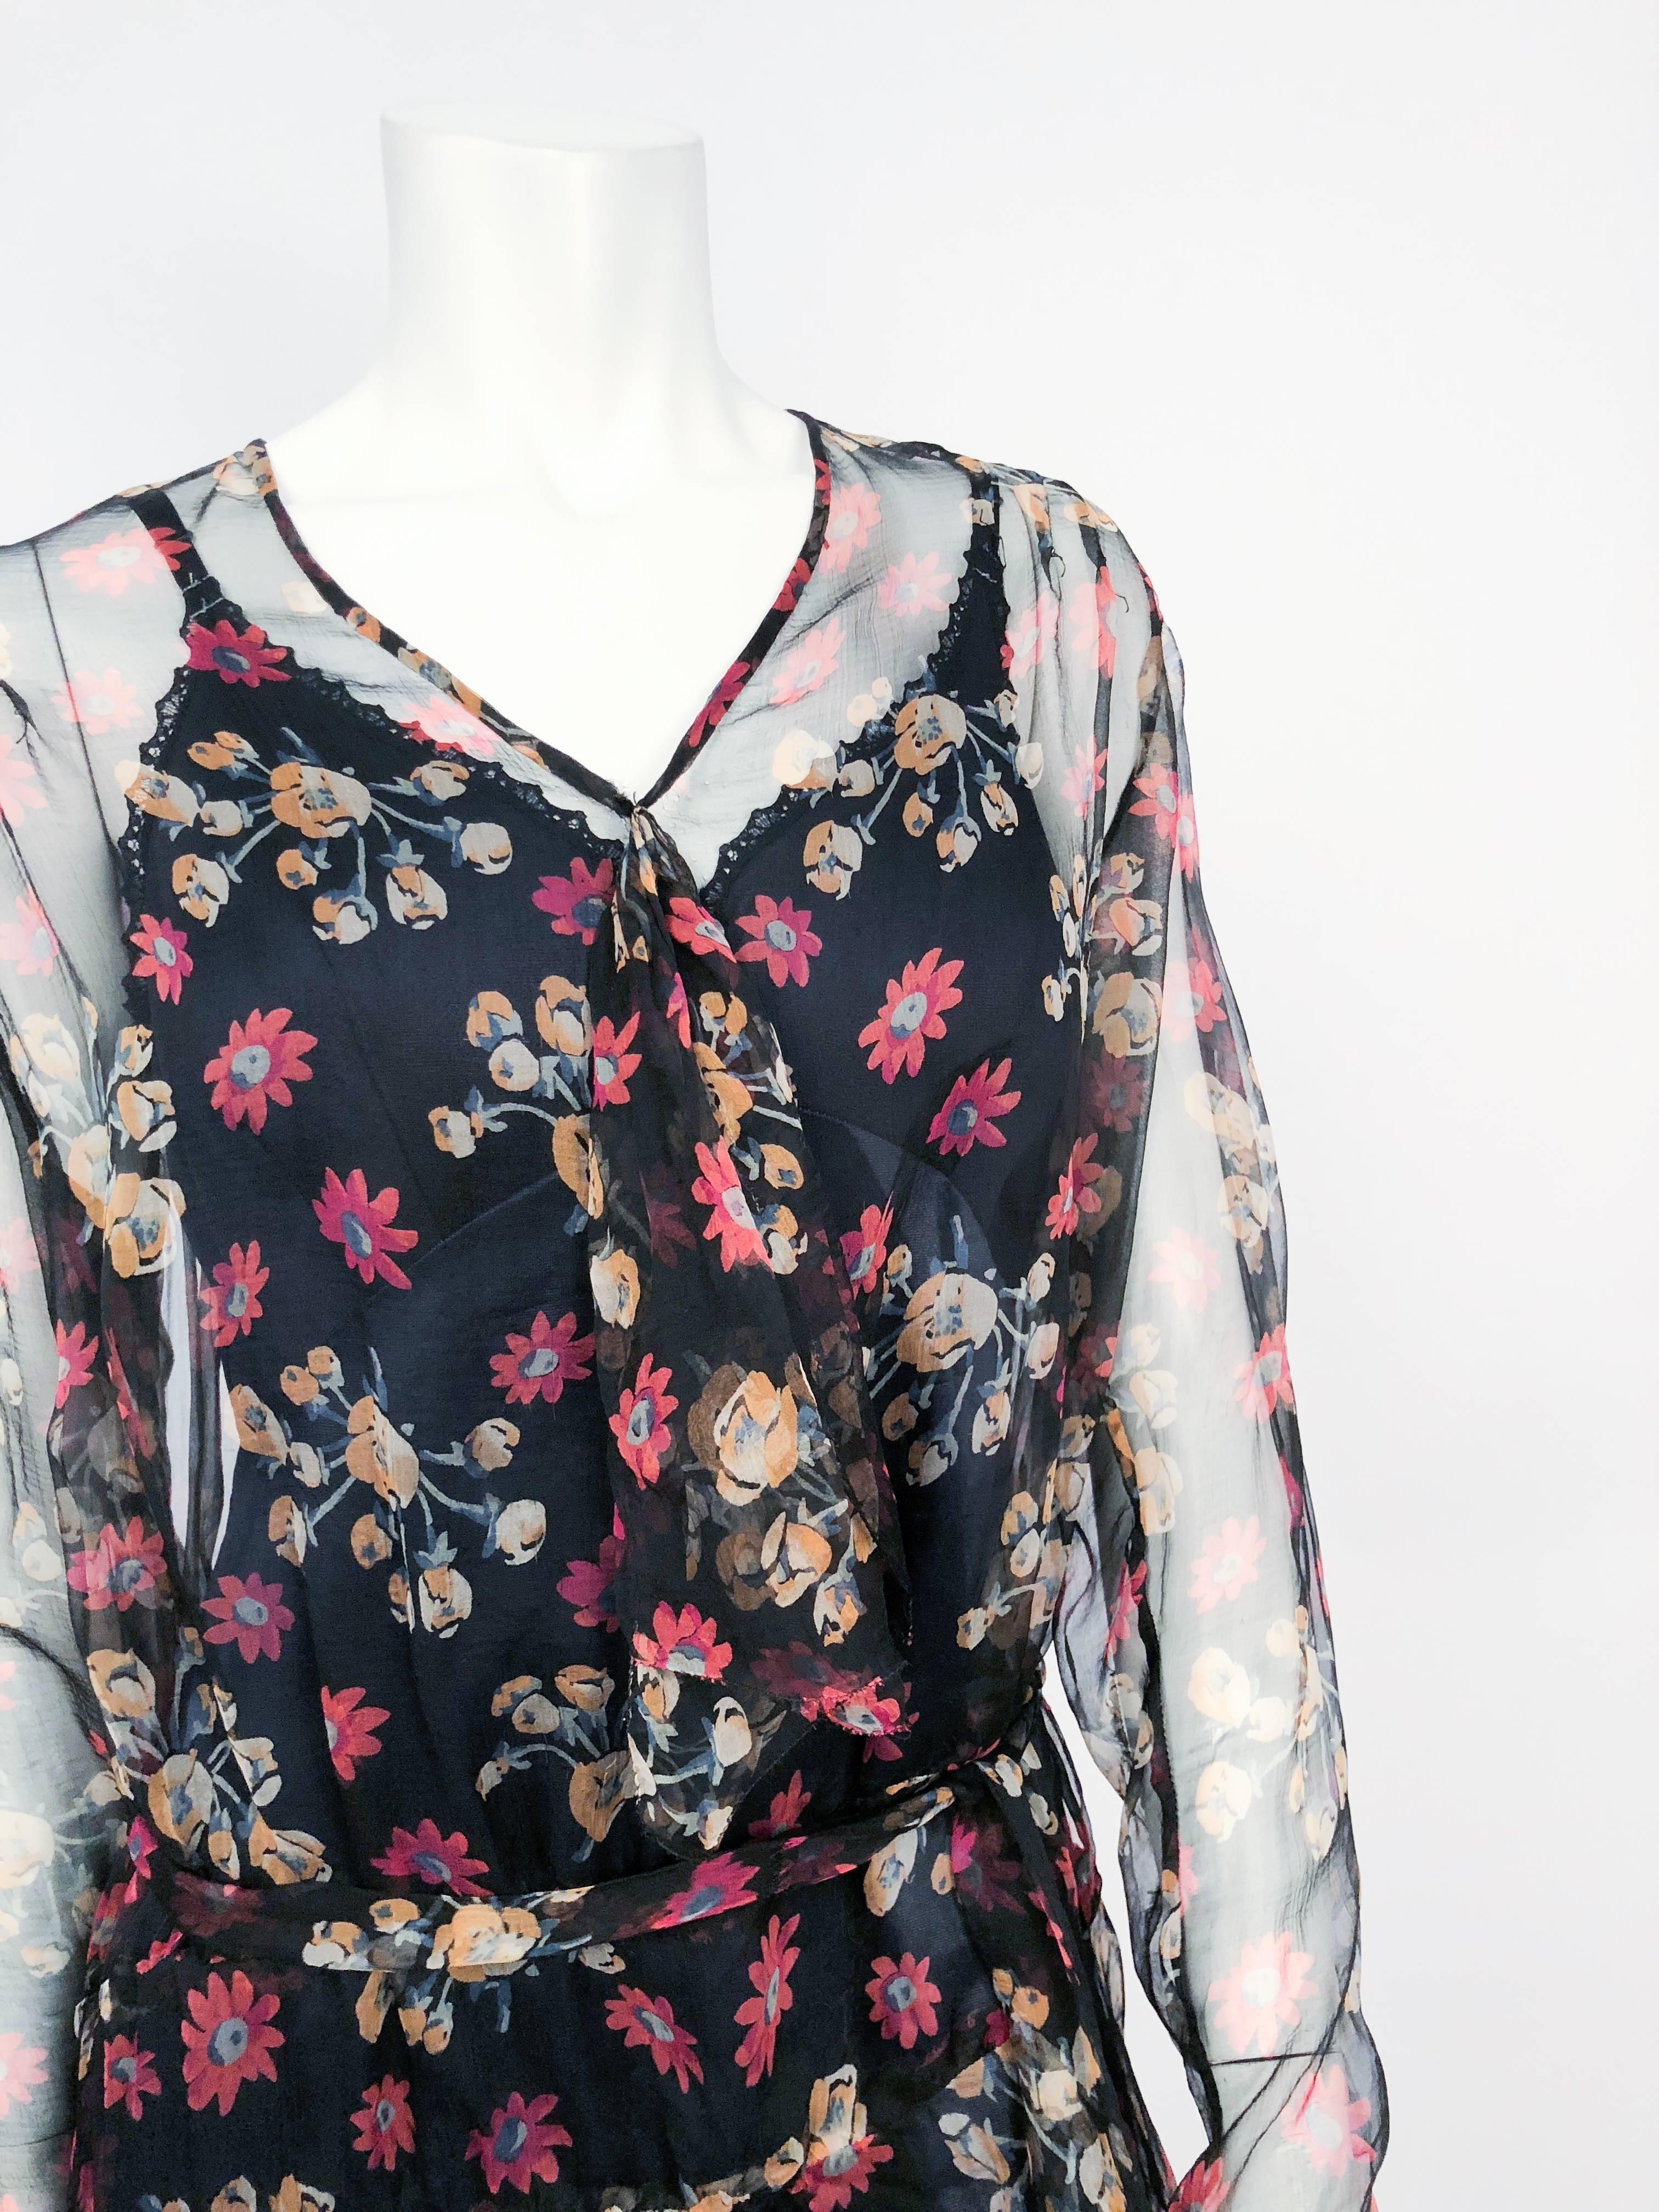 Sheer Floral Printed Silk Chiffon Dress, 1920s  In Good Condition For Sale In San Francisco, CA